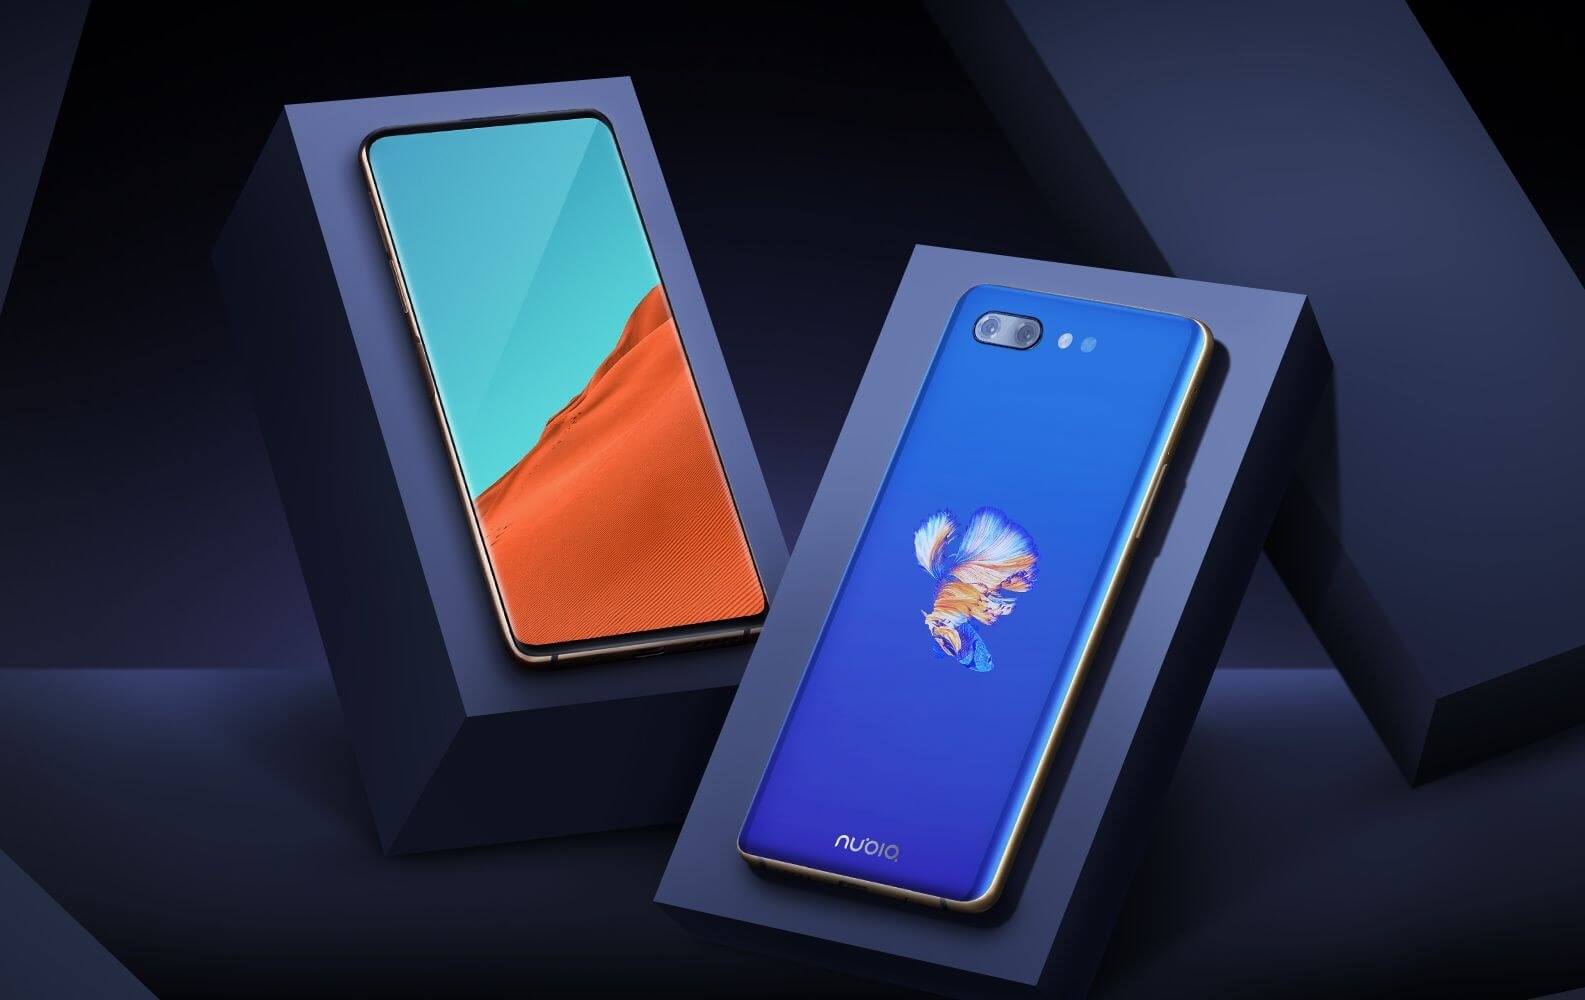 Check out the Nubia X: a notch-free phone with a second display on the back